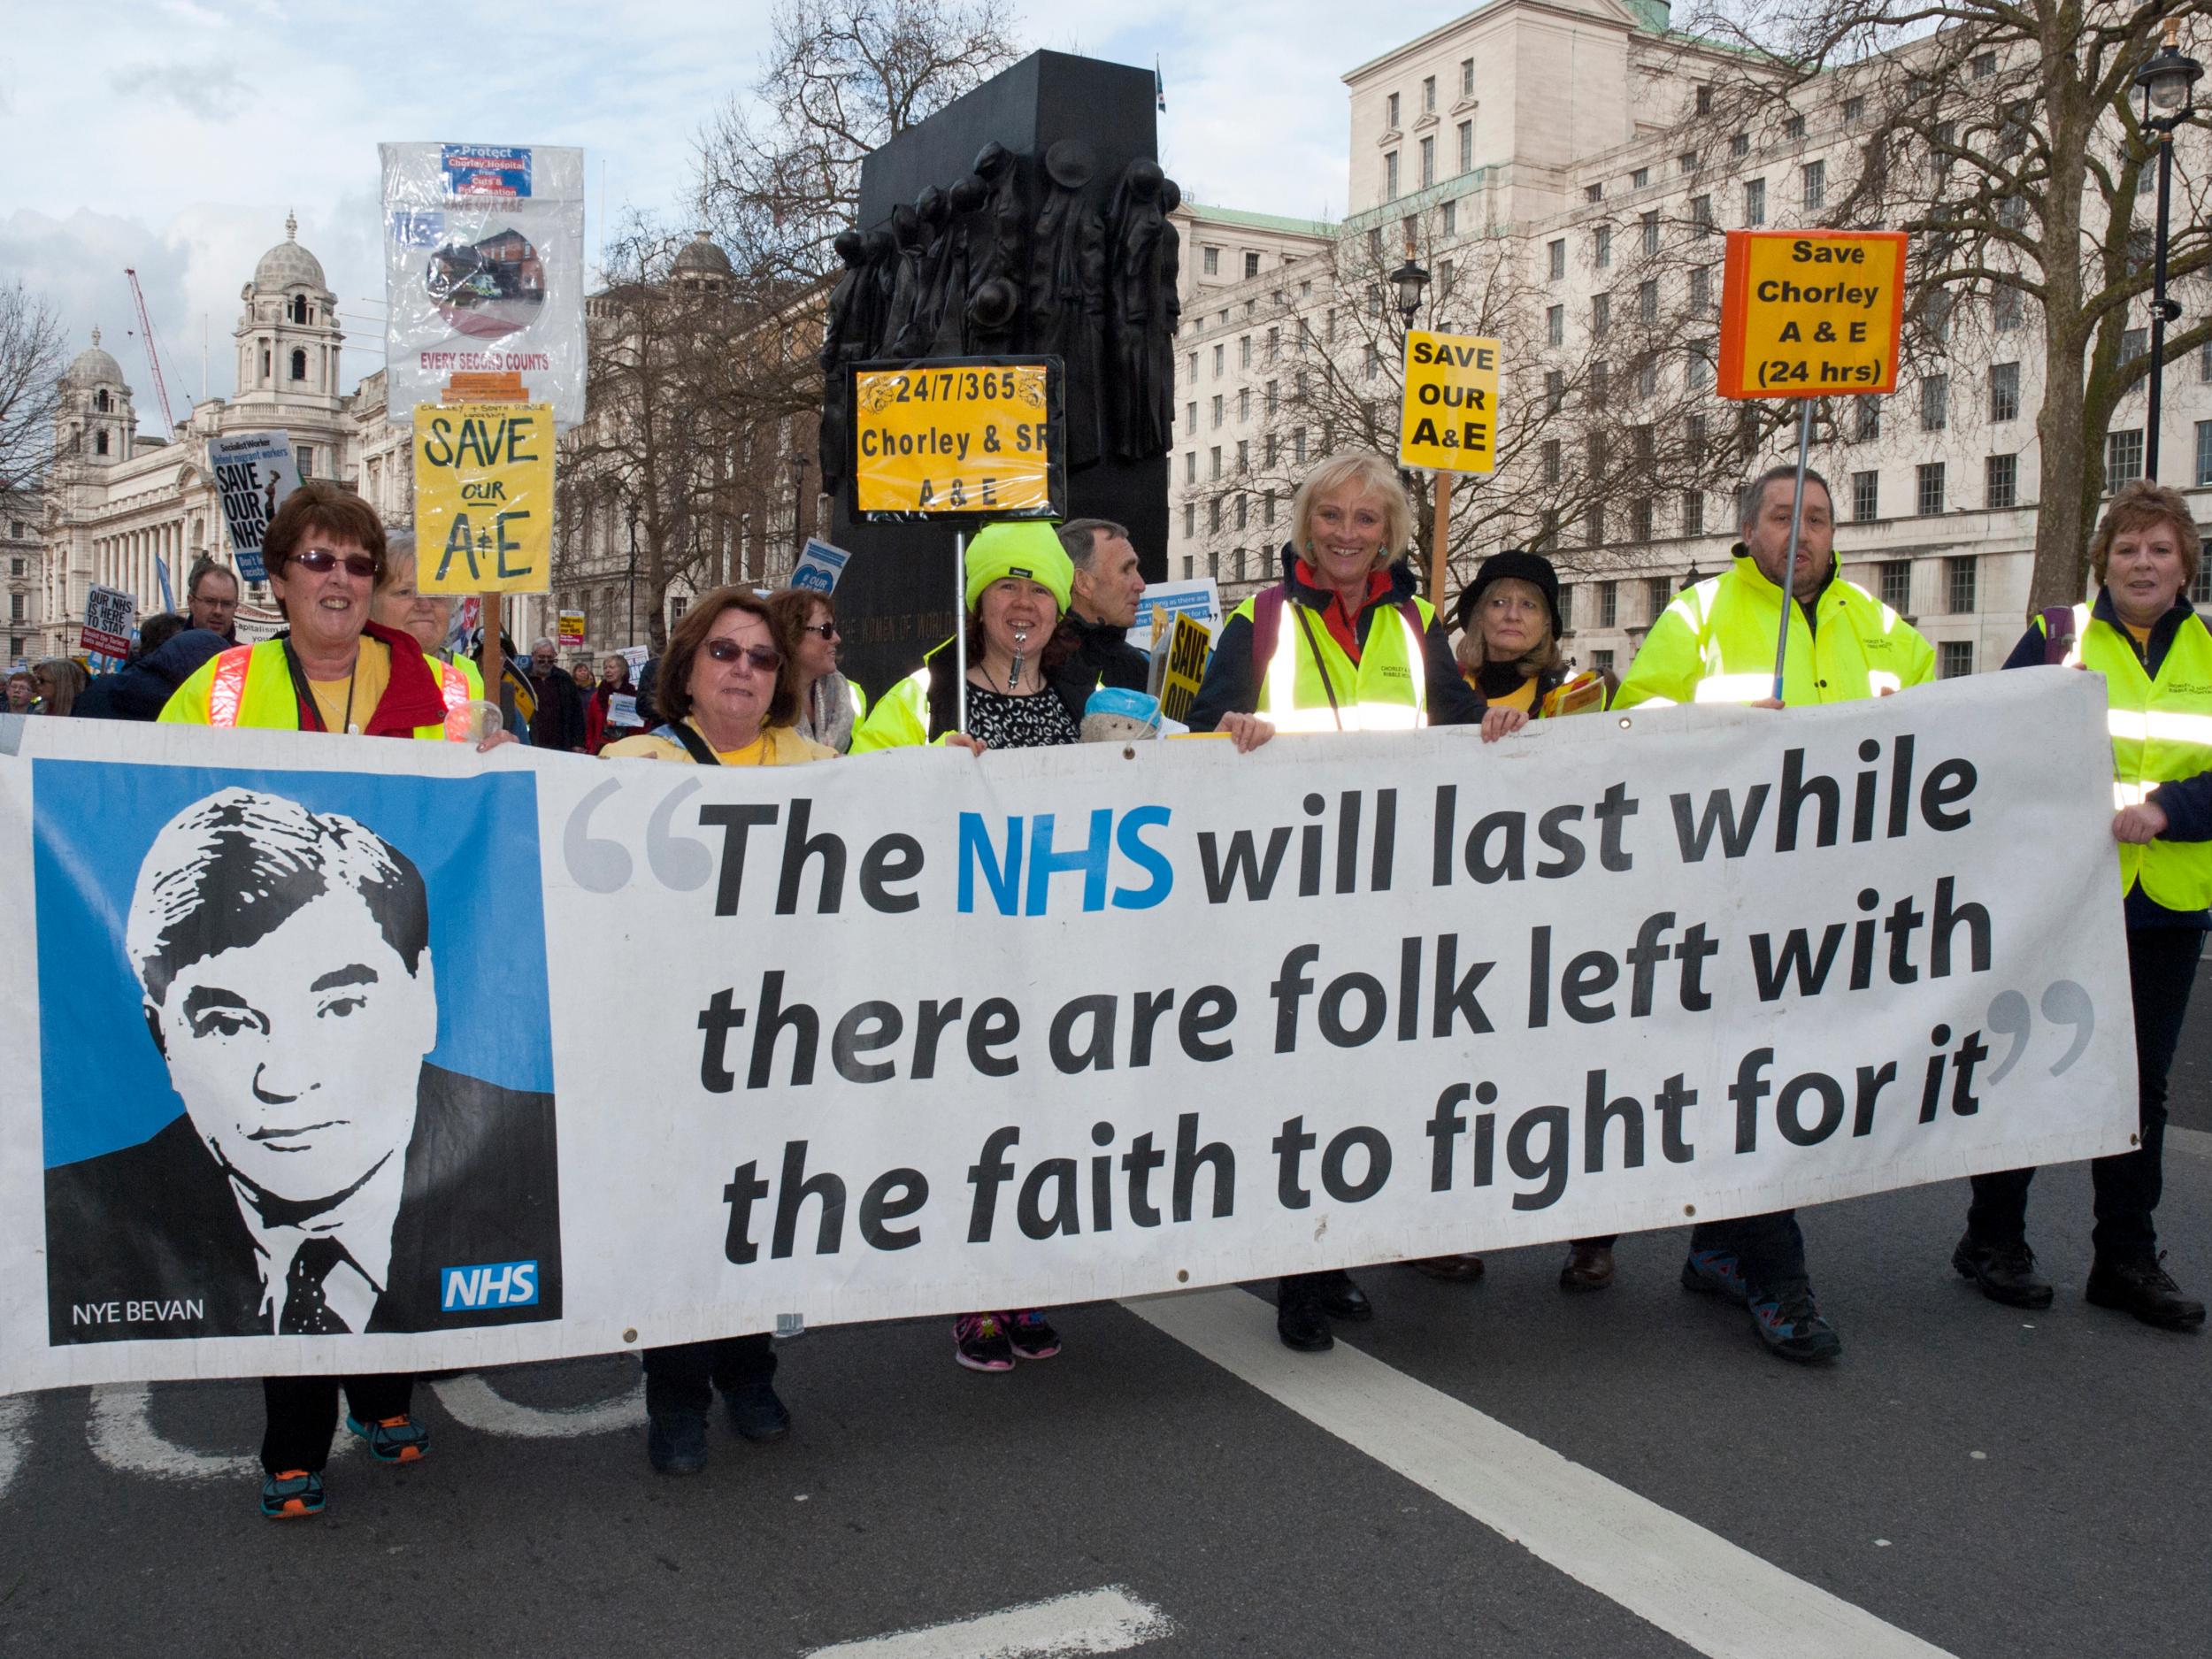 Every generation must make the case anew for our NHS